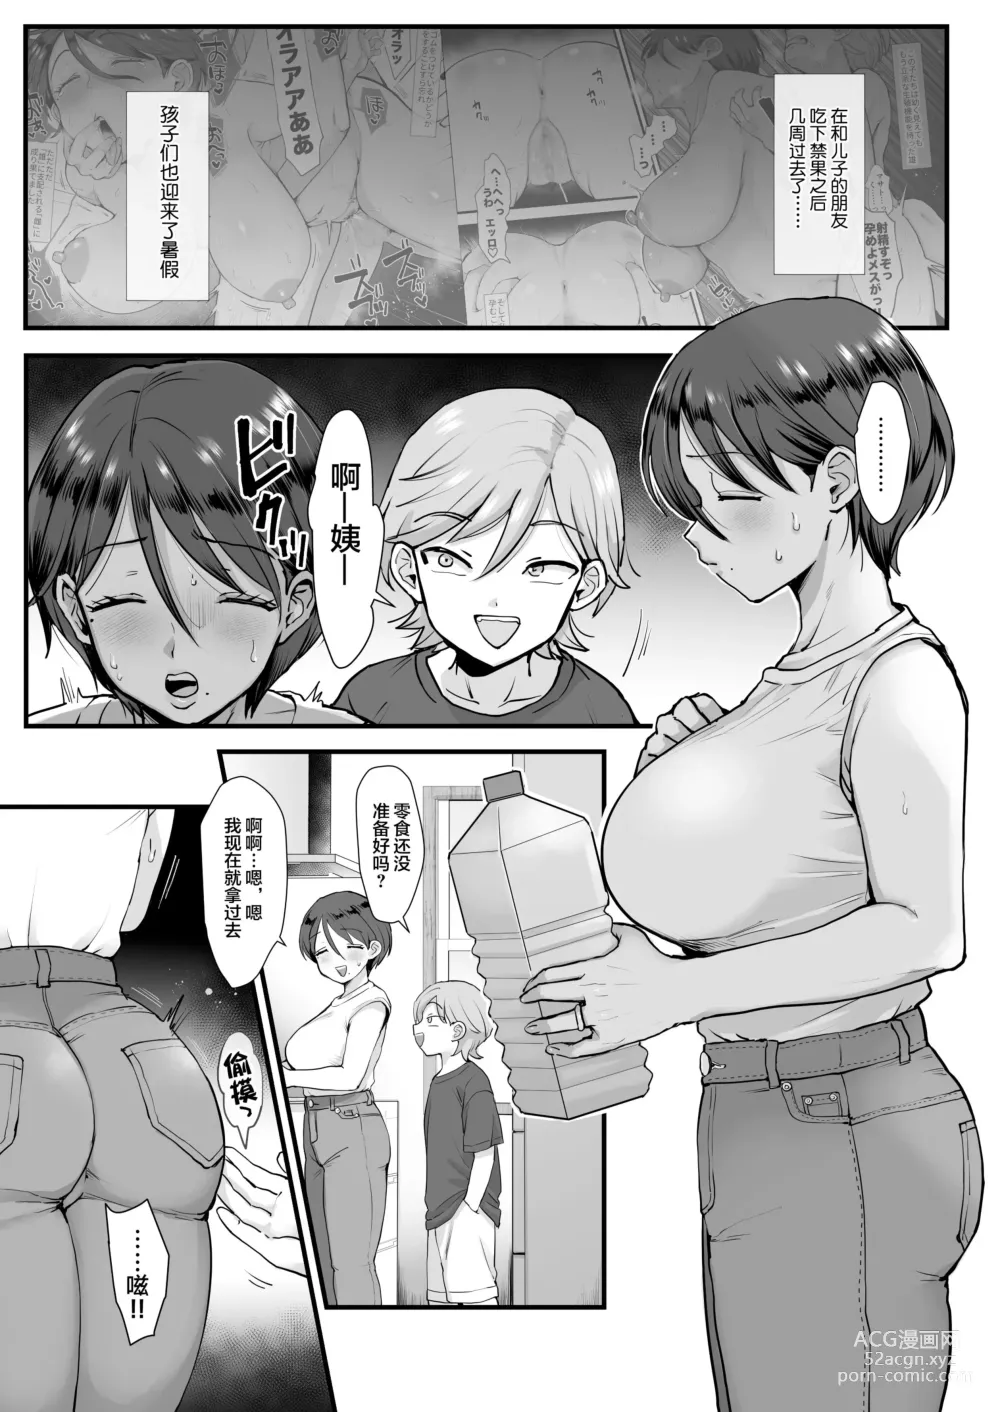 Page 4 of doujinshi sinistra (Eda)] Continued: A laid-back big-breasted mom. [Chinese translation